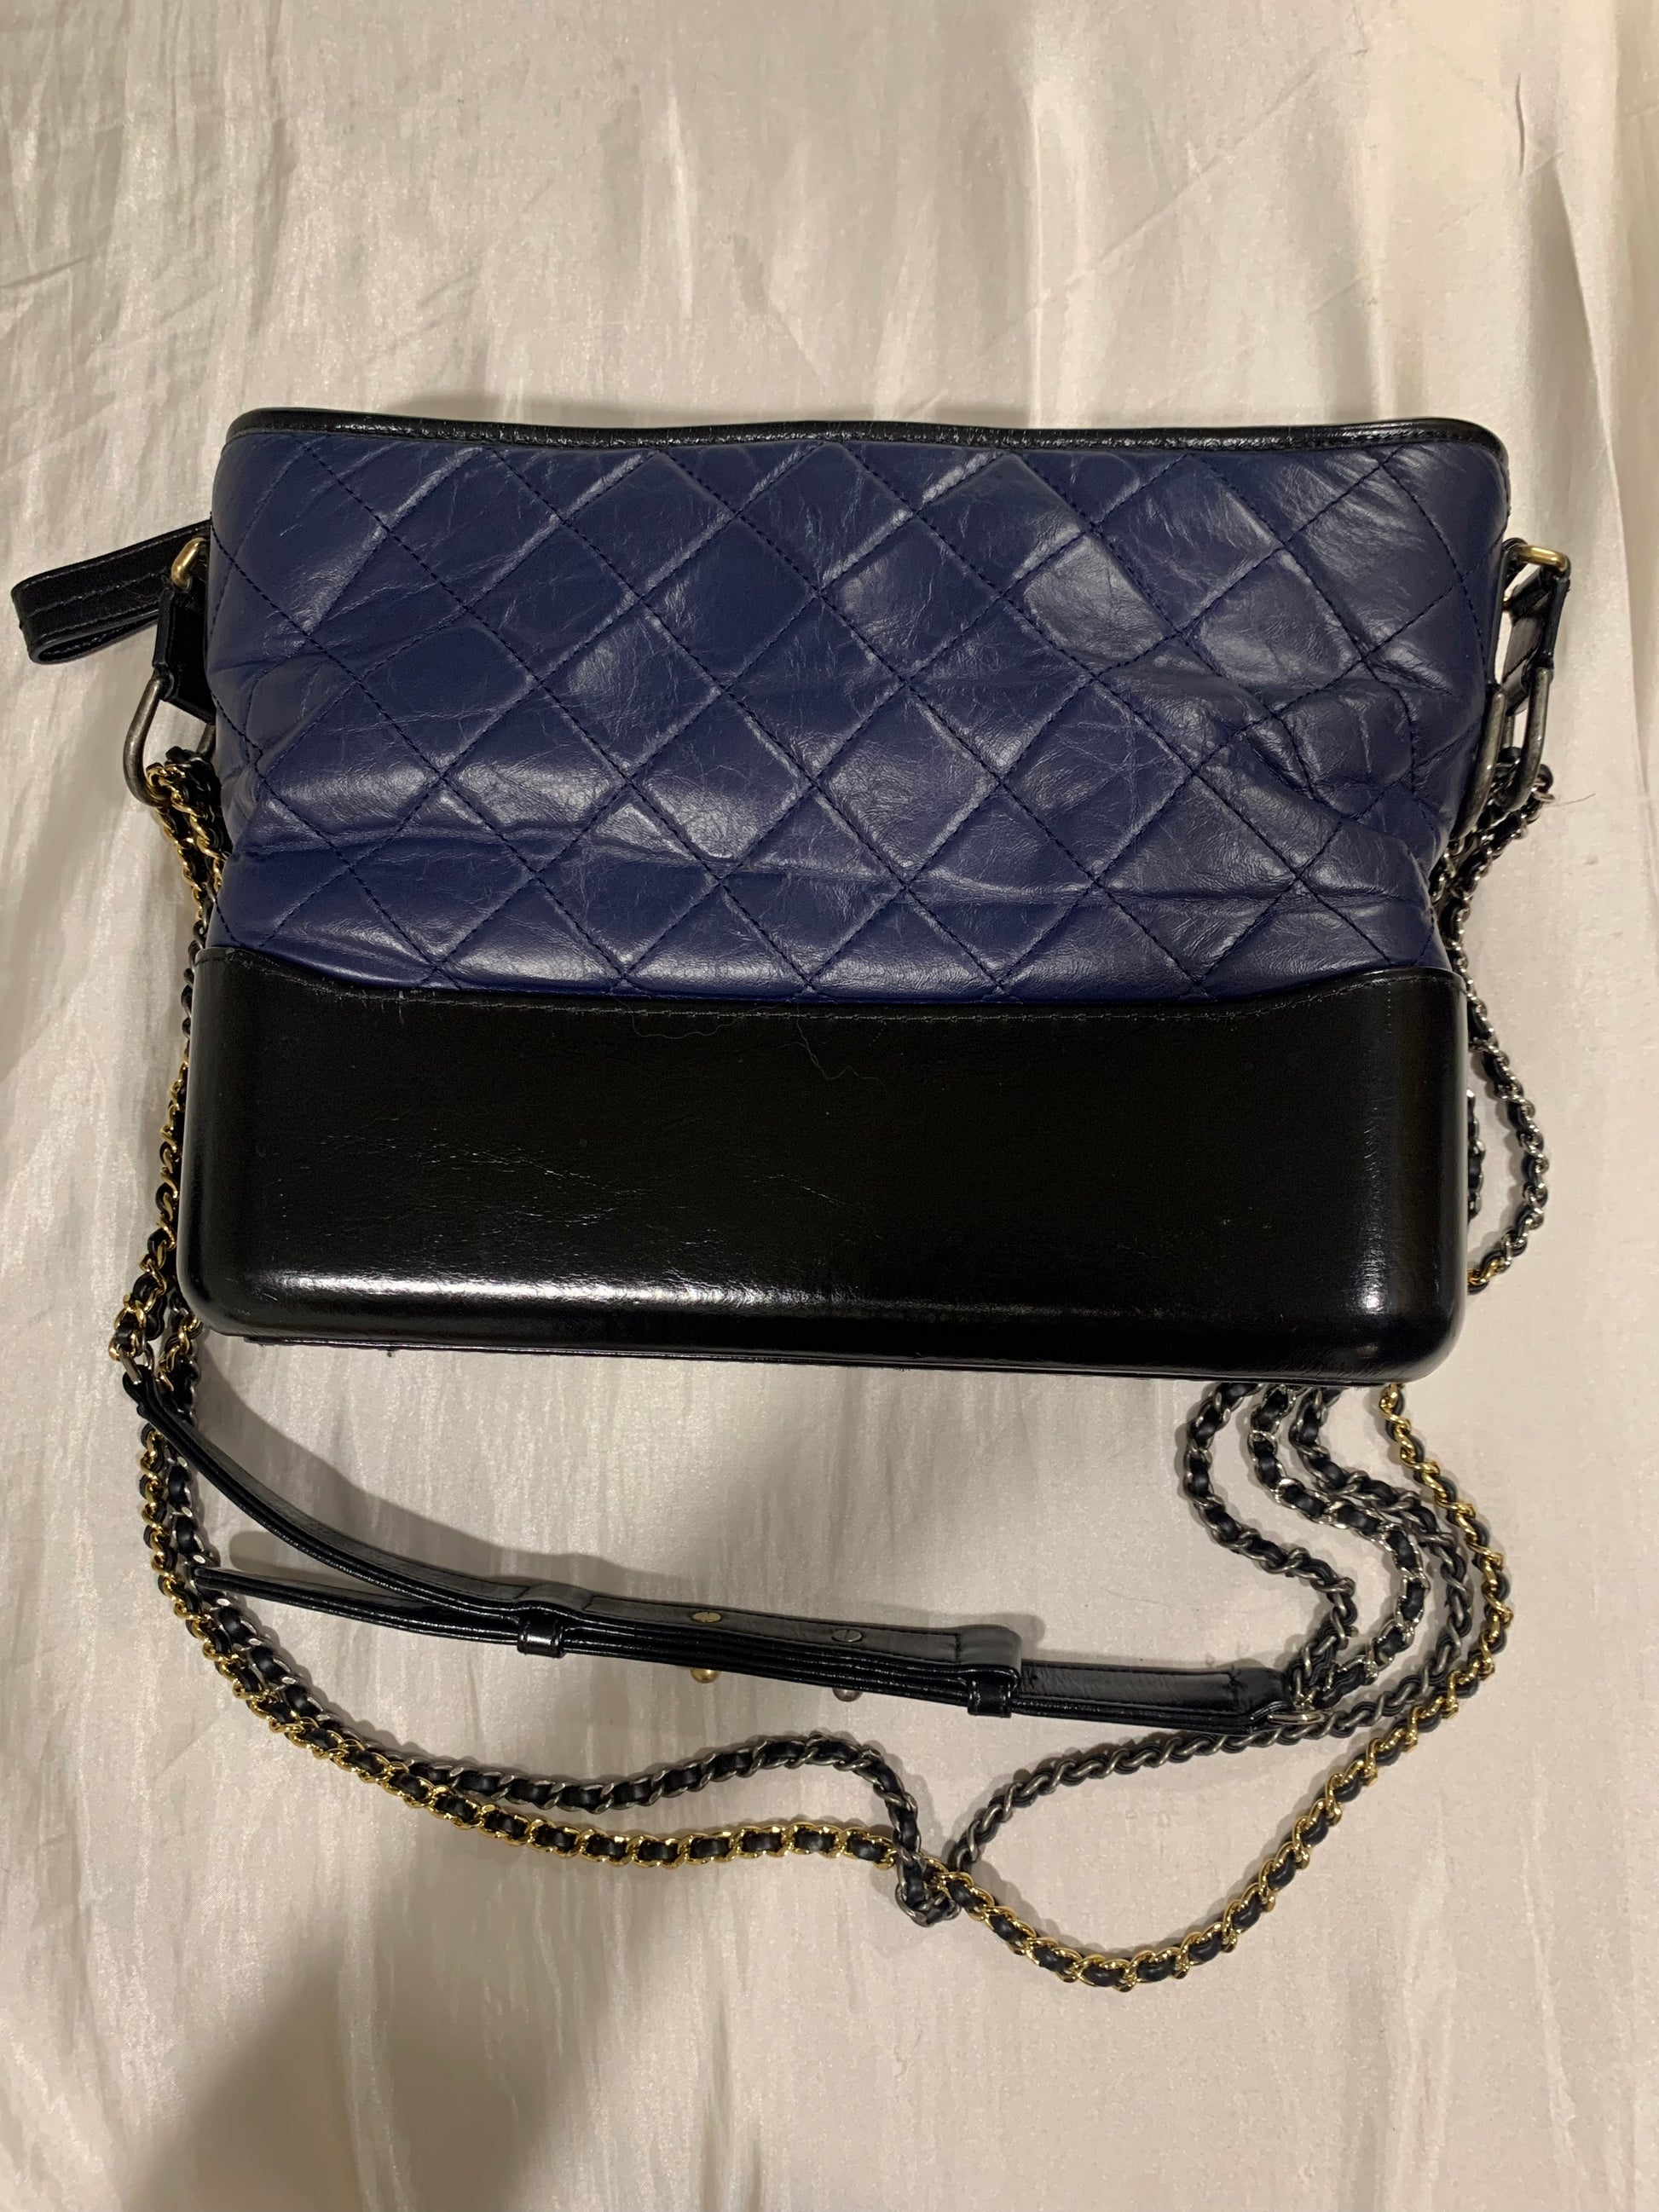 Chanel Gabrielle Large Hobo bag 復古小牛皮流浪包 - STAY PURE